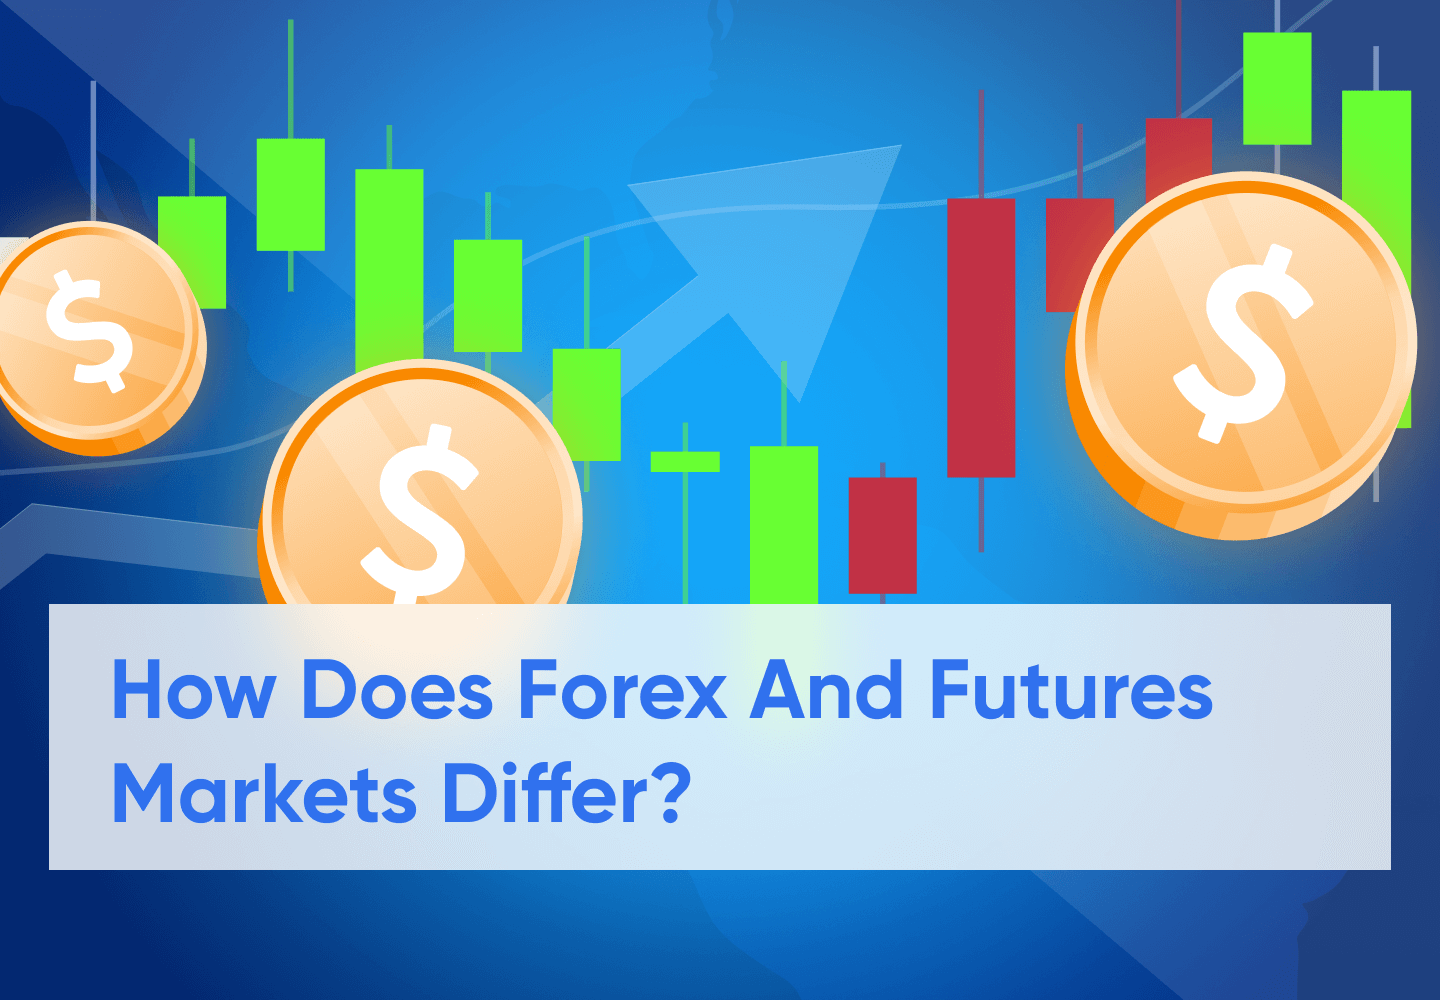 Futures vs. Forex, Understanding How They Differ